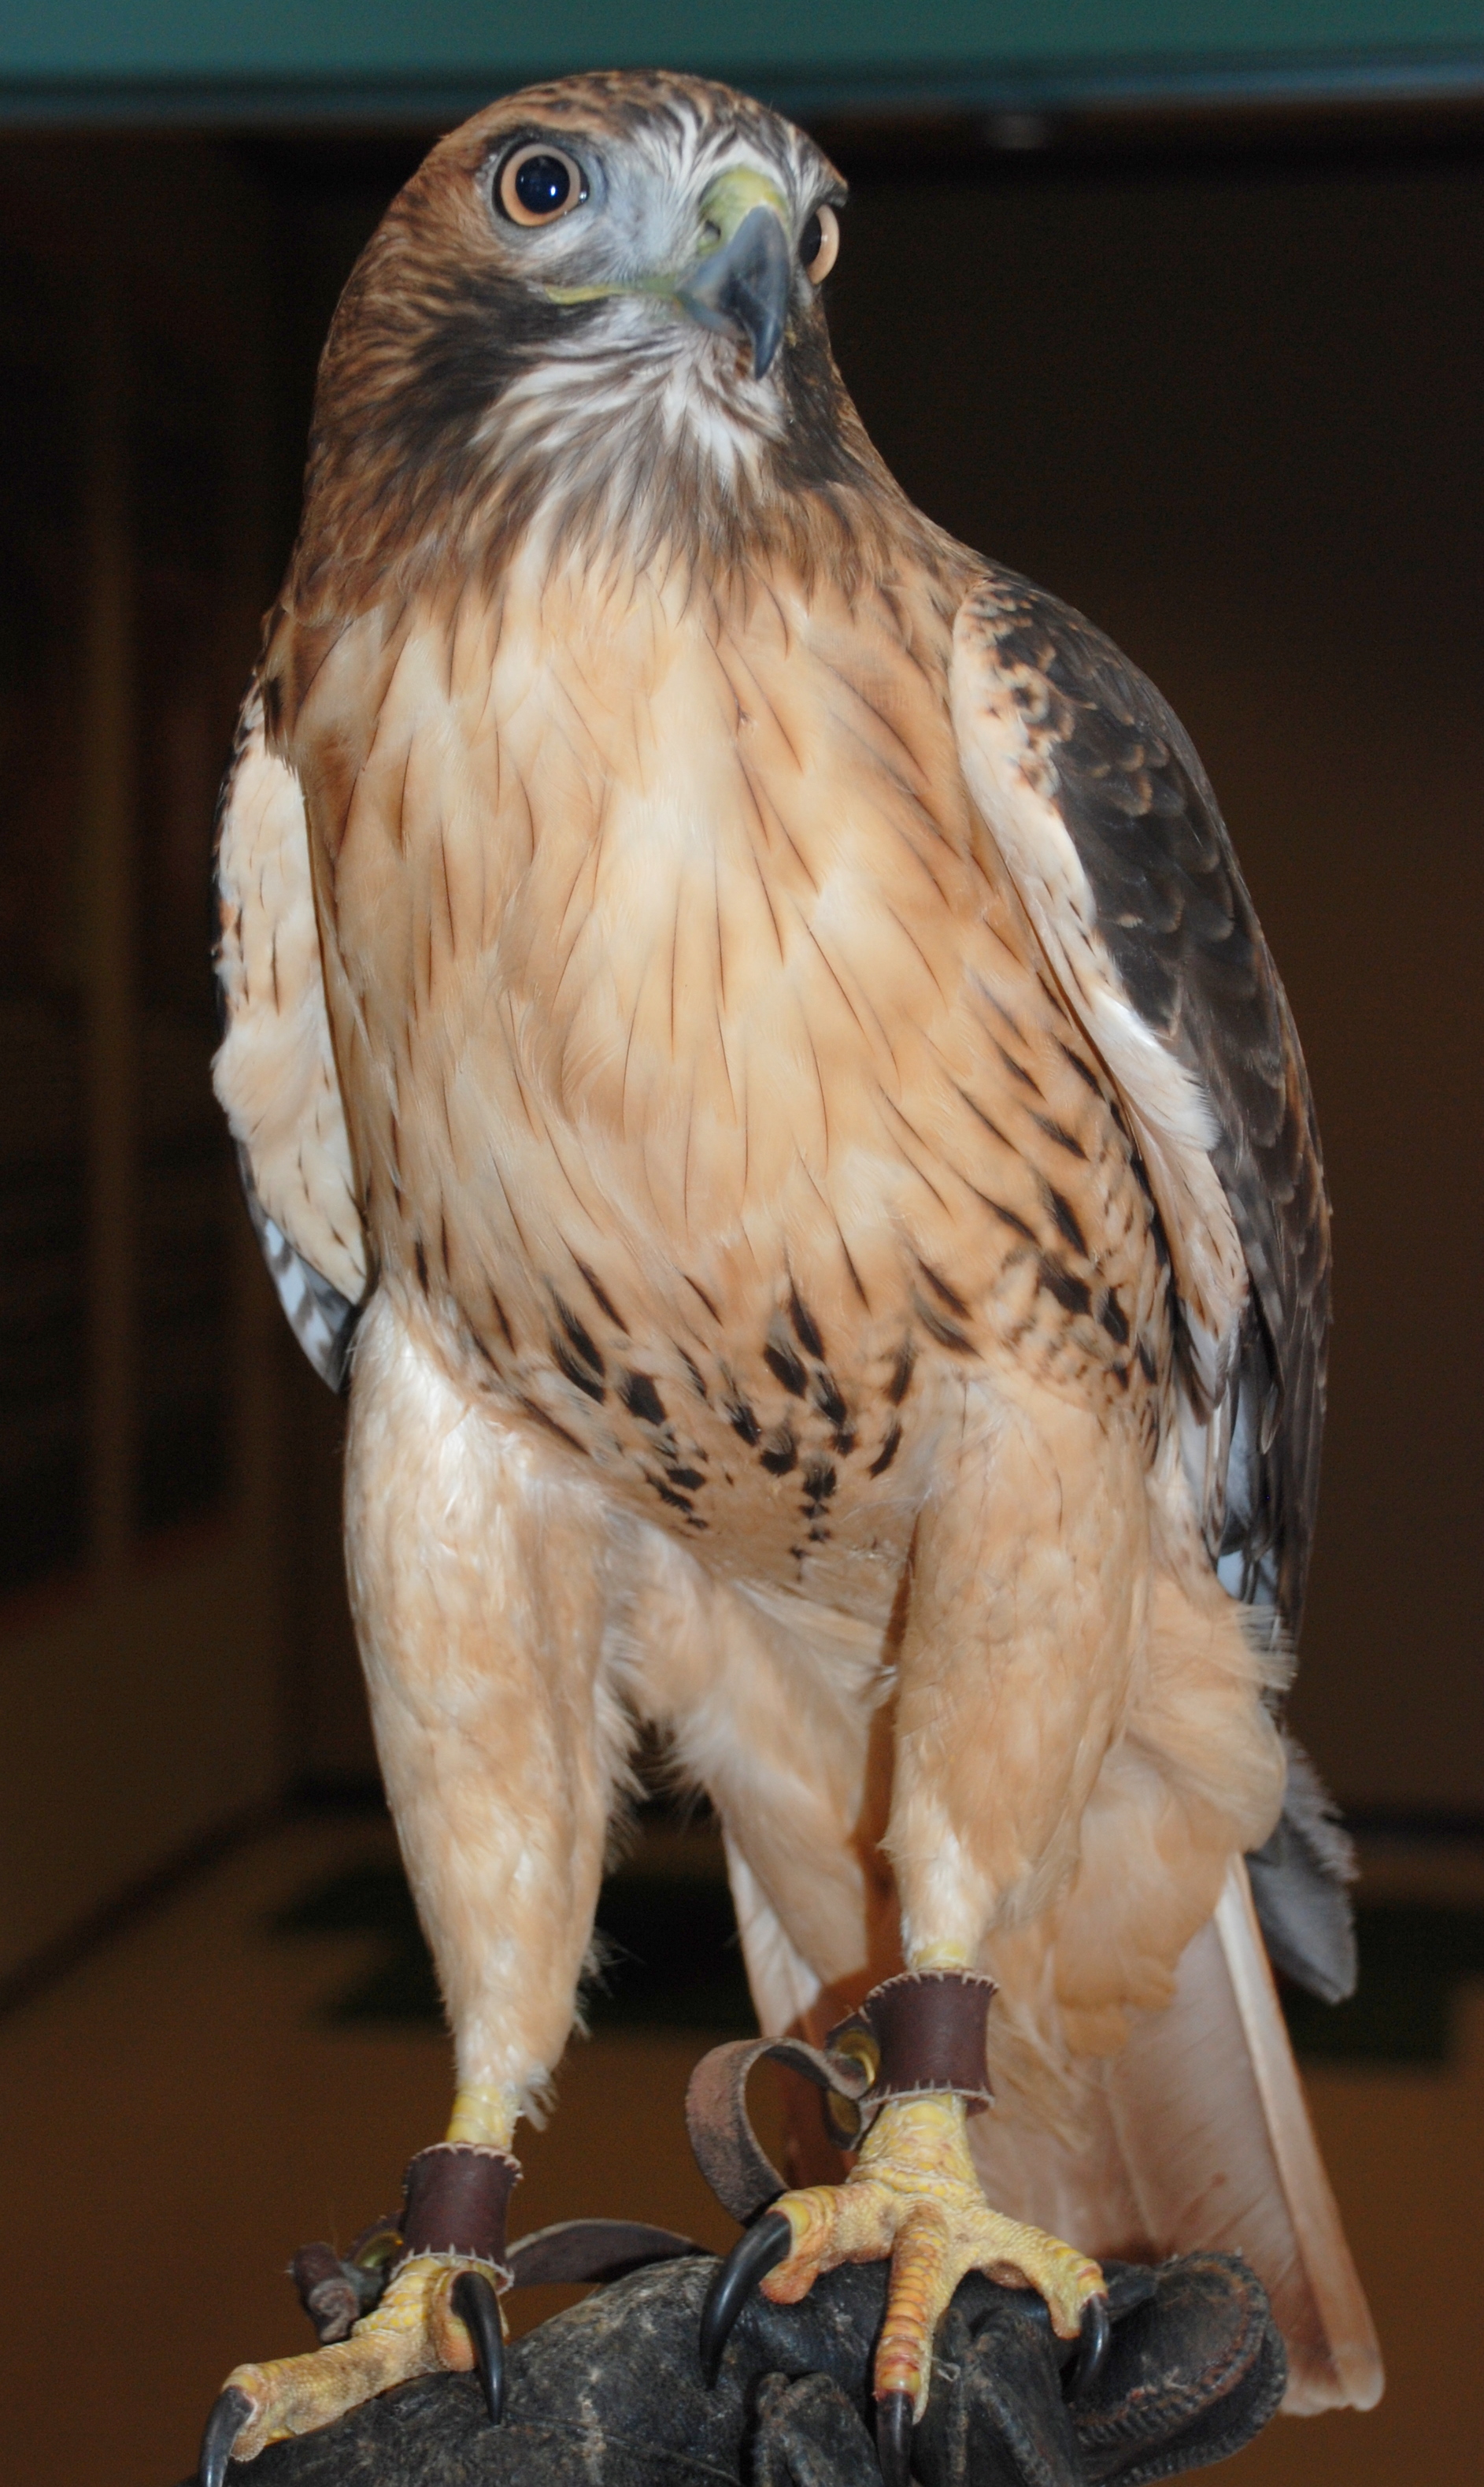 Alula, the red-tailed hawk